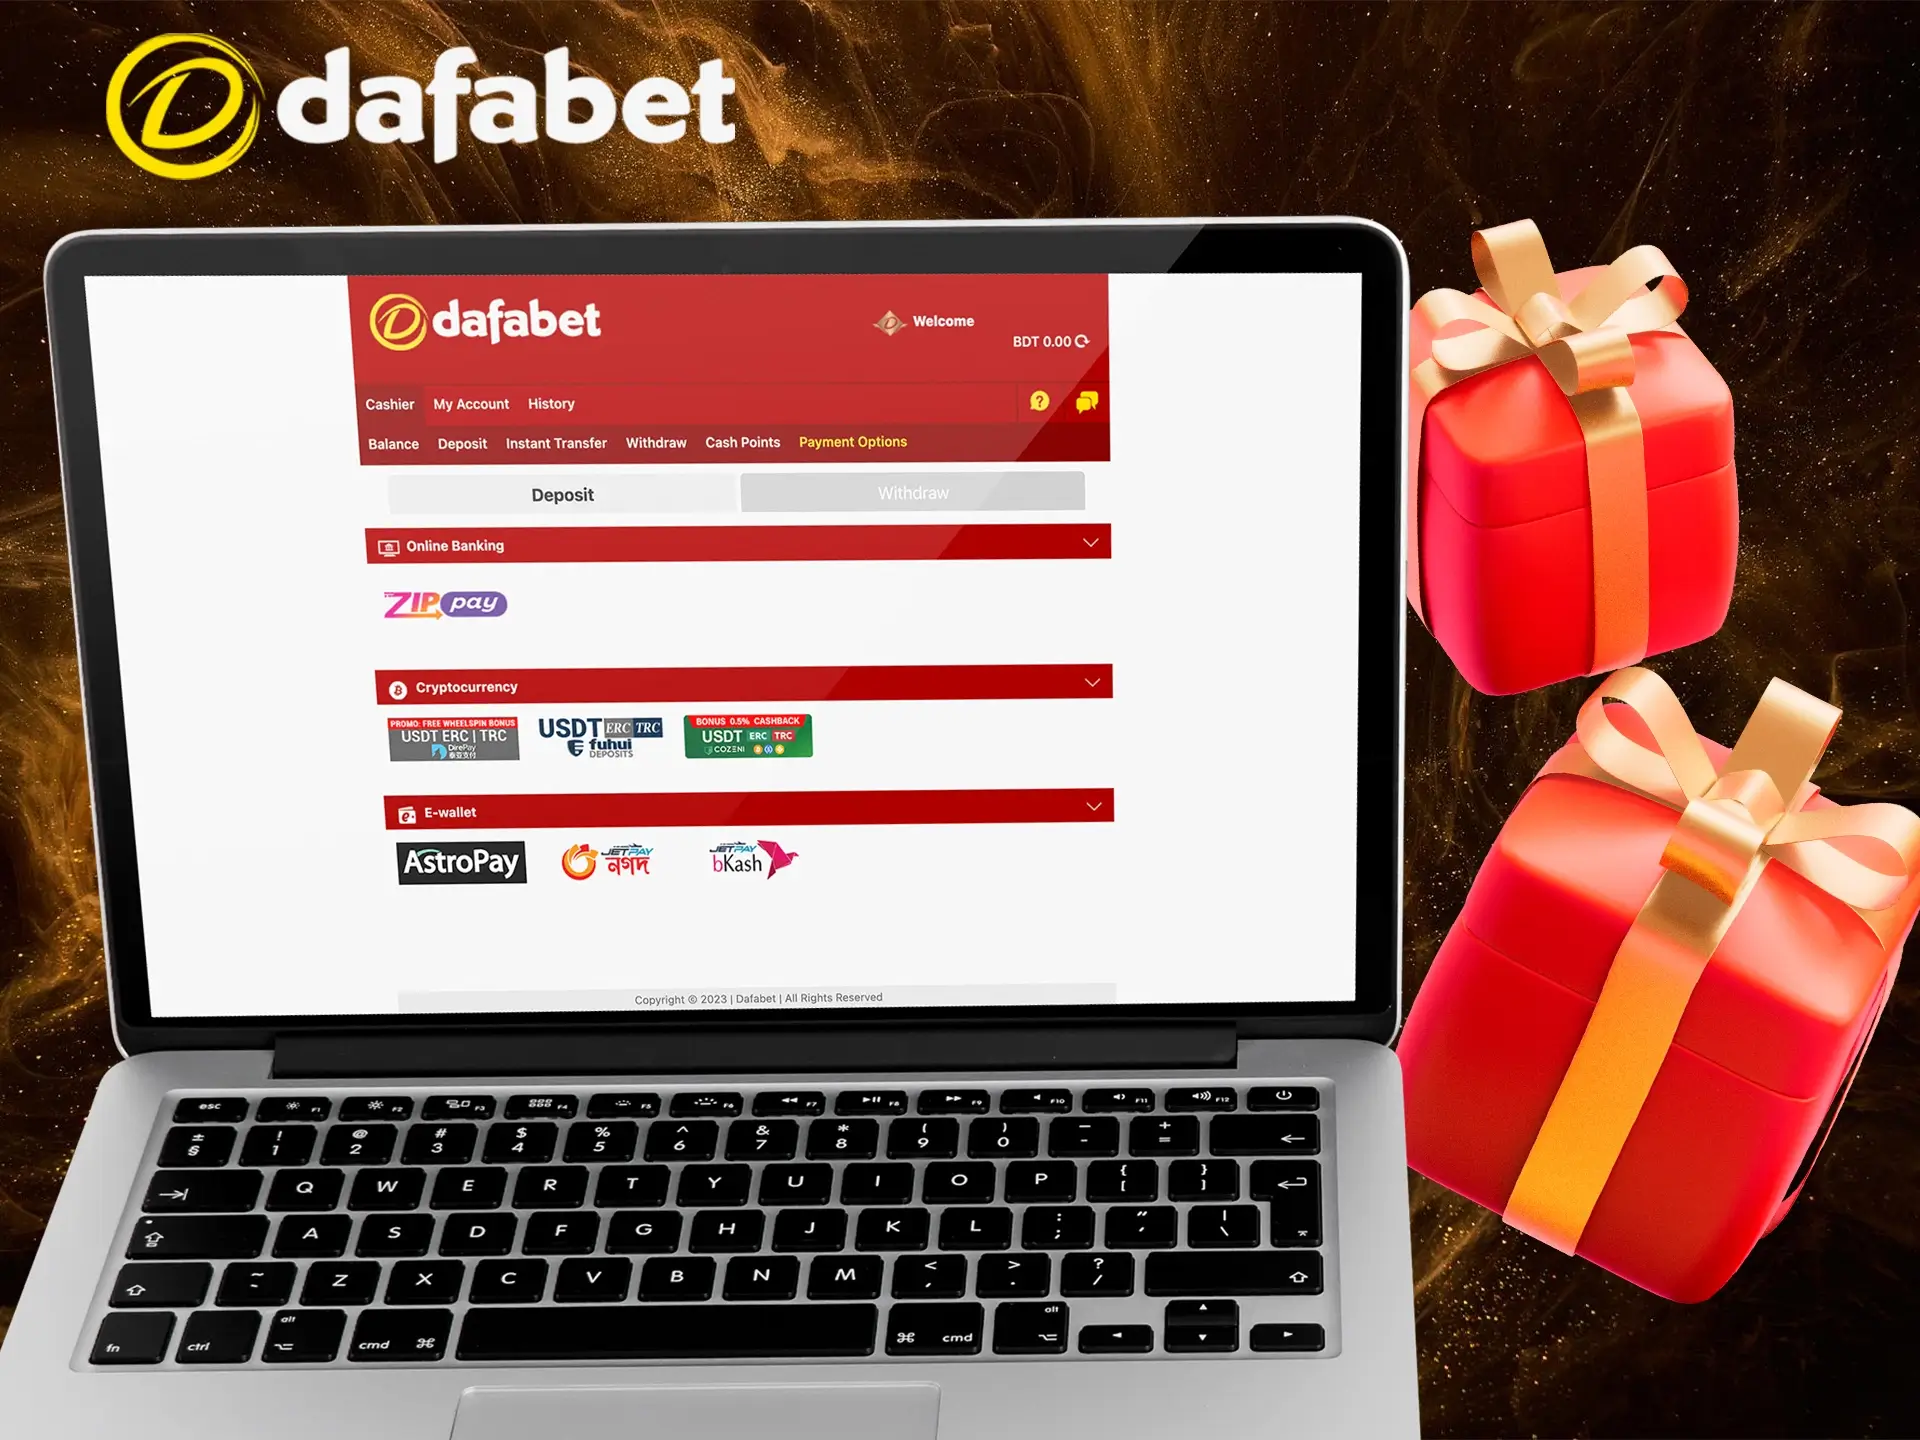 Make a deposit and own a bonus from the one and only Dafabet Casino.